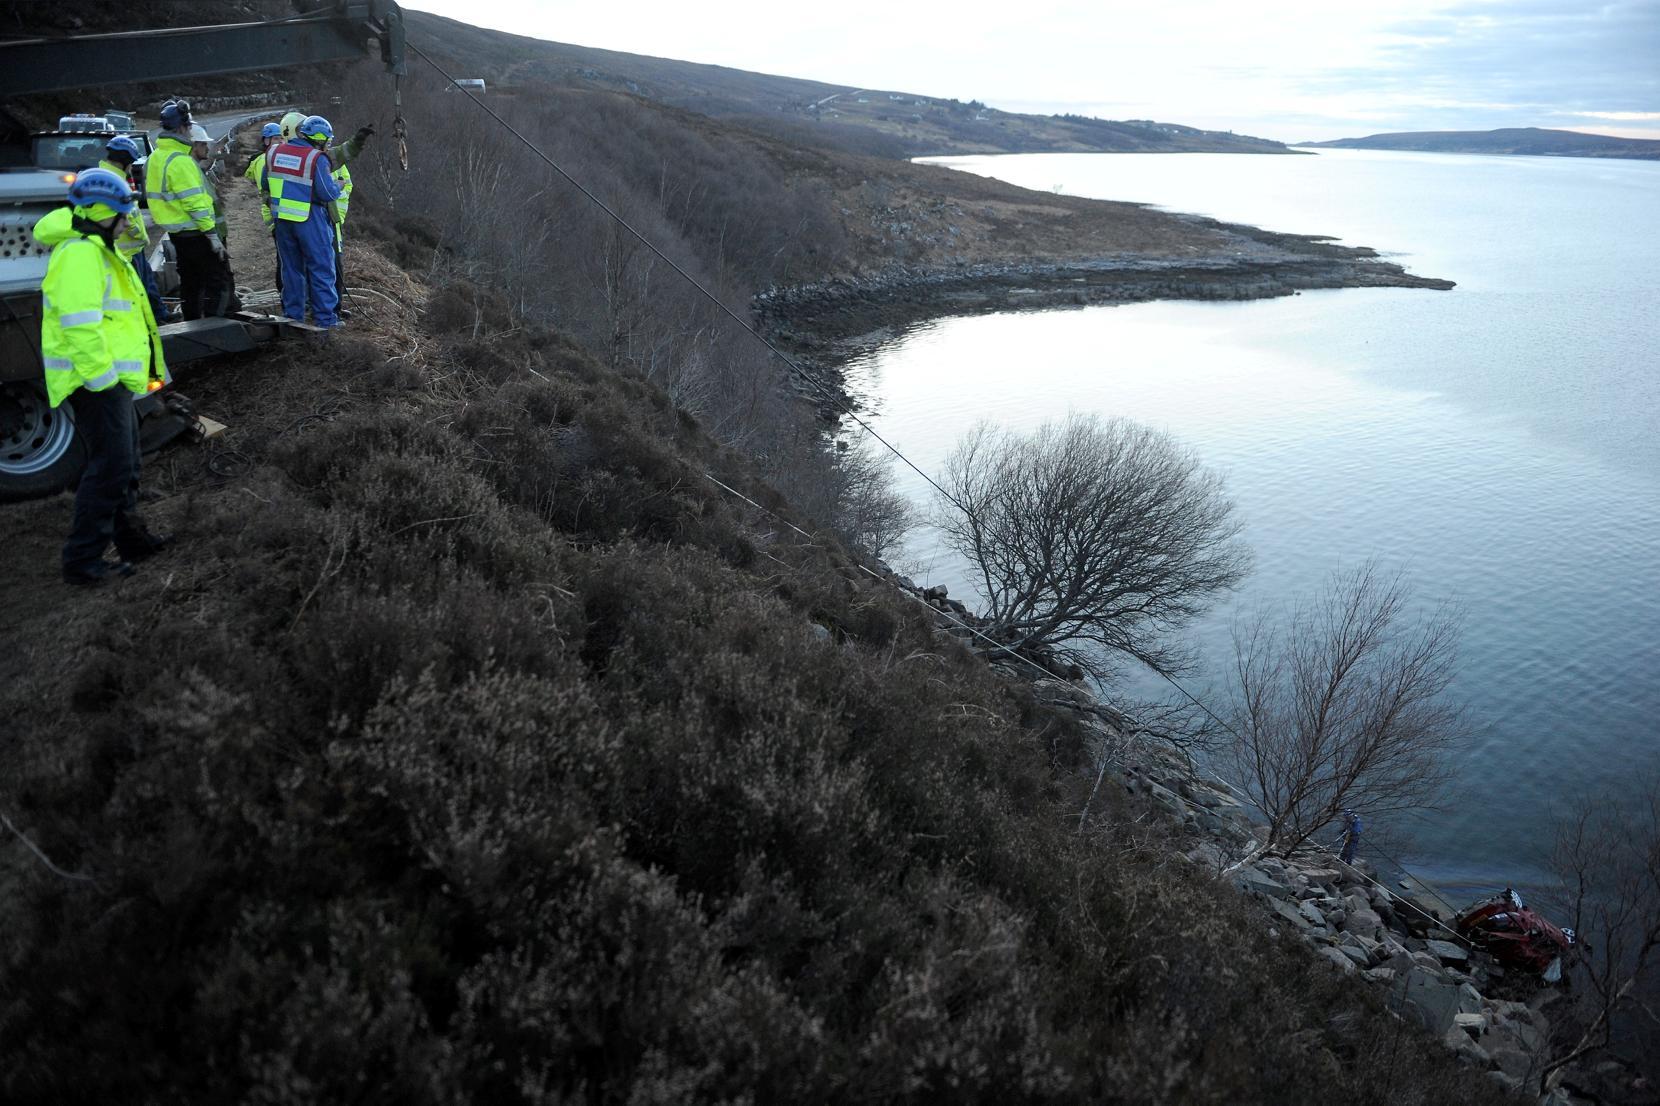 The Honda Civic is recovered from Little Loch Broom near Ardessie.